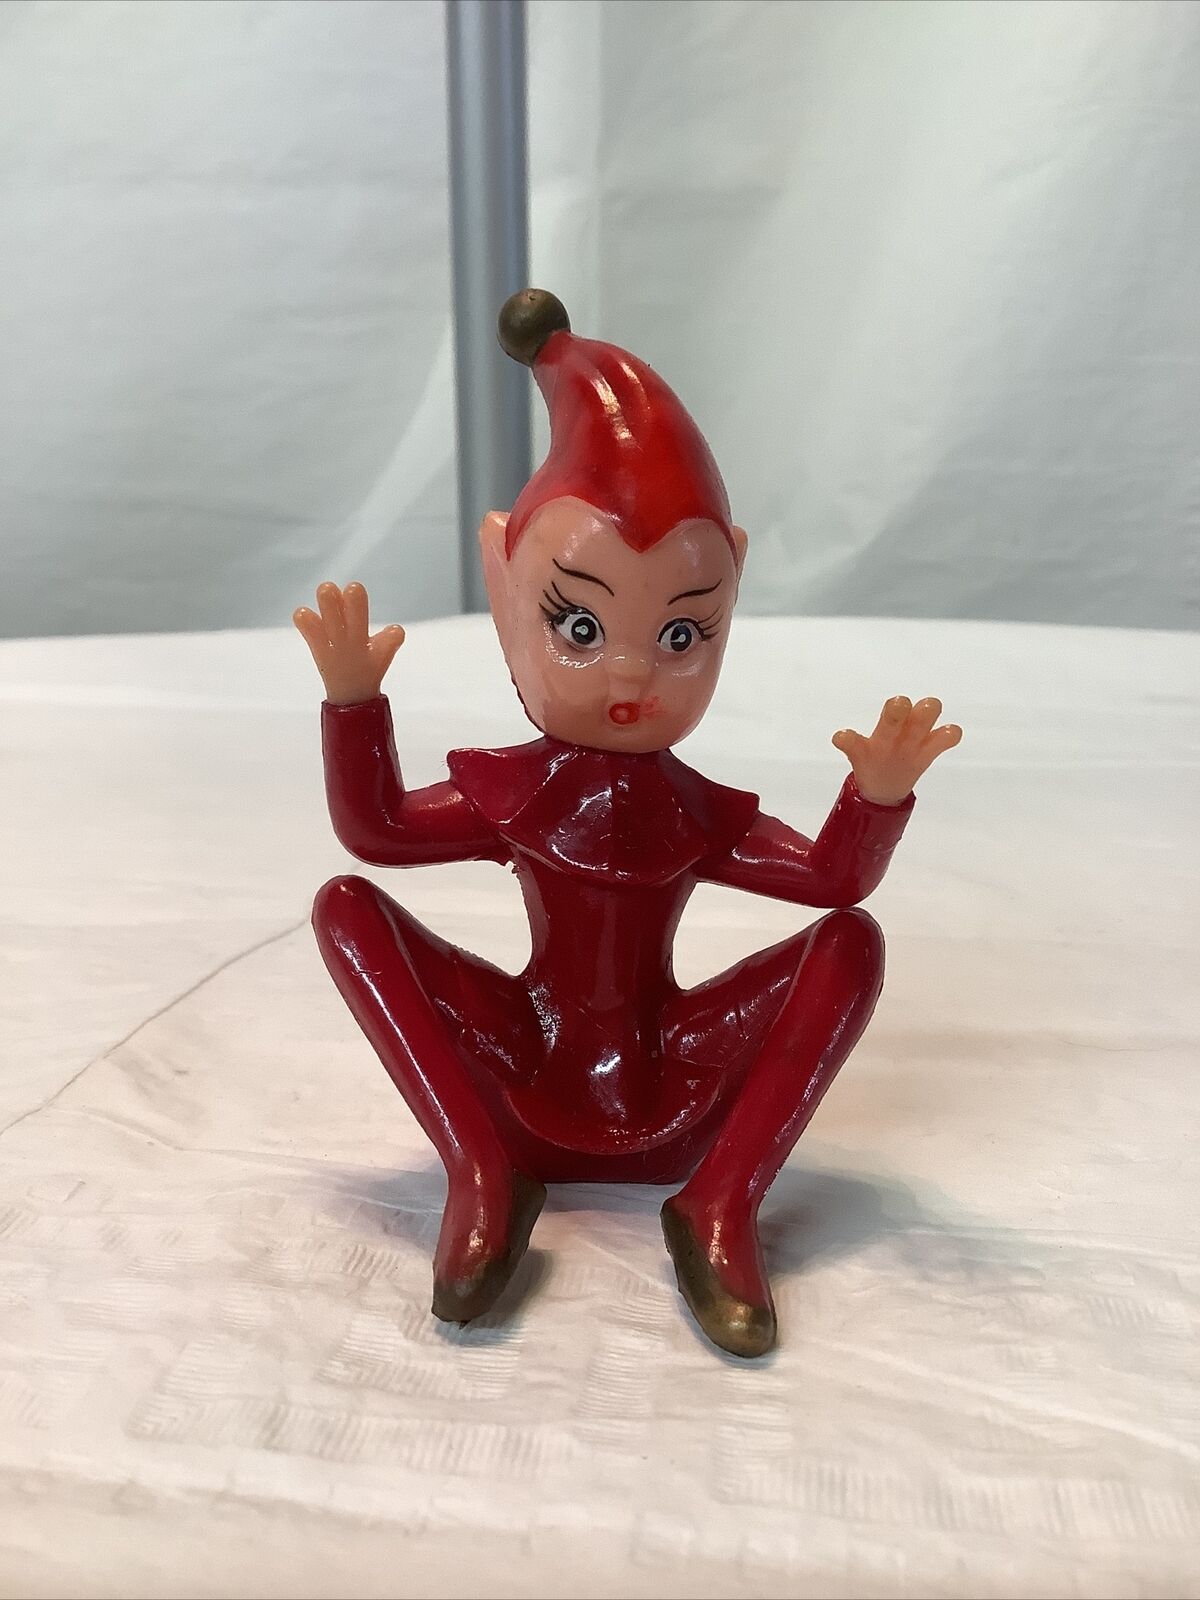 Vintage Christmas 1950’s Rubber Elf Pixie Red Sitting Jazz Hands Surprised